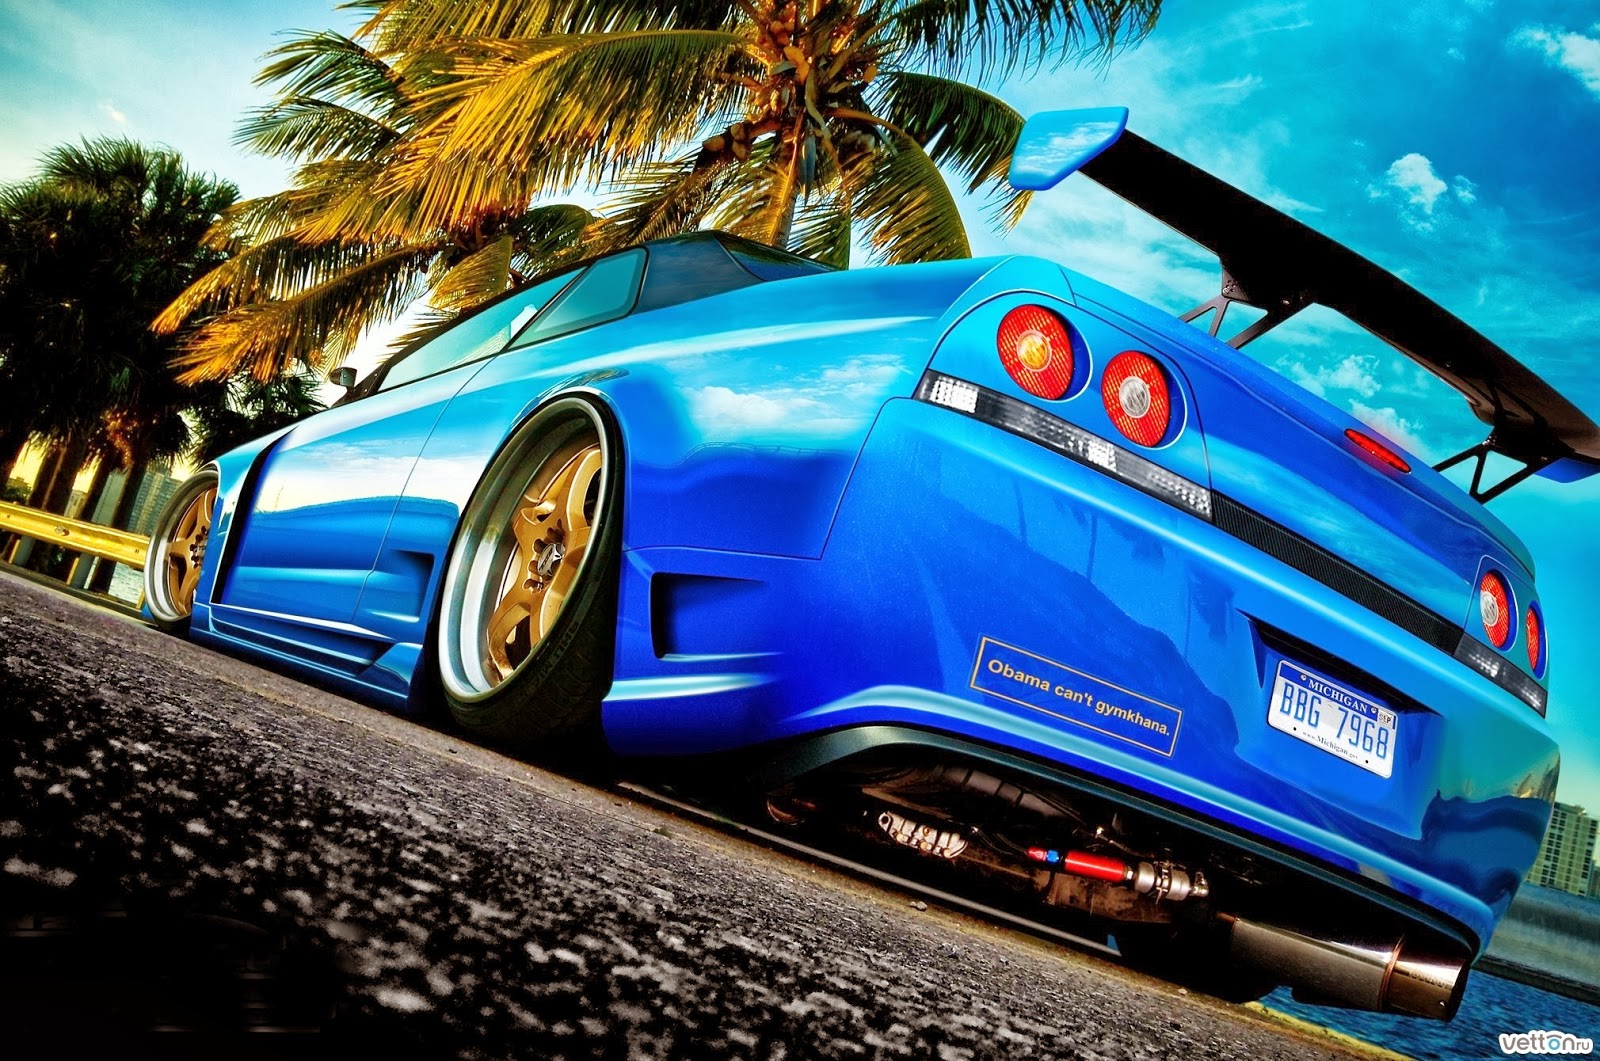 Image Of Nissan Skyline Wallpaper And Prices Car Pletely